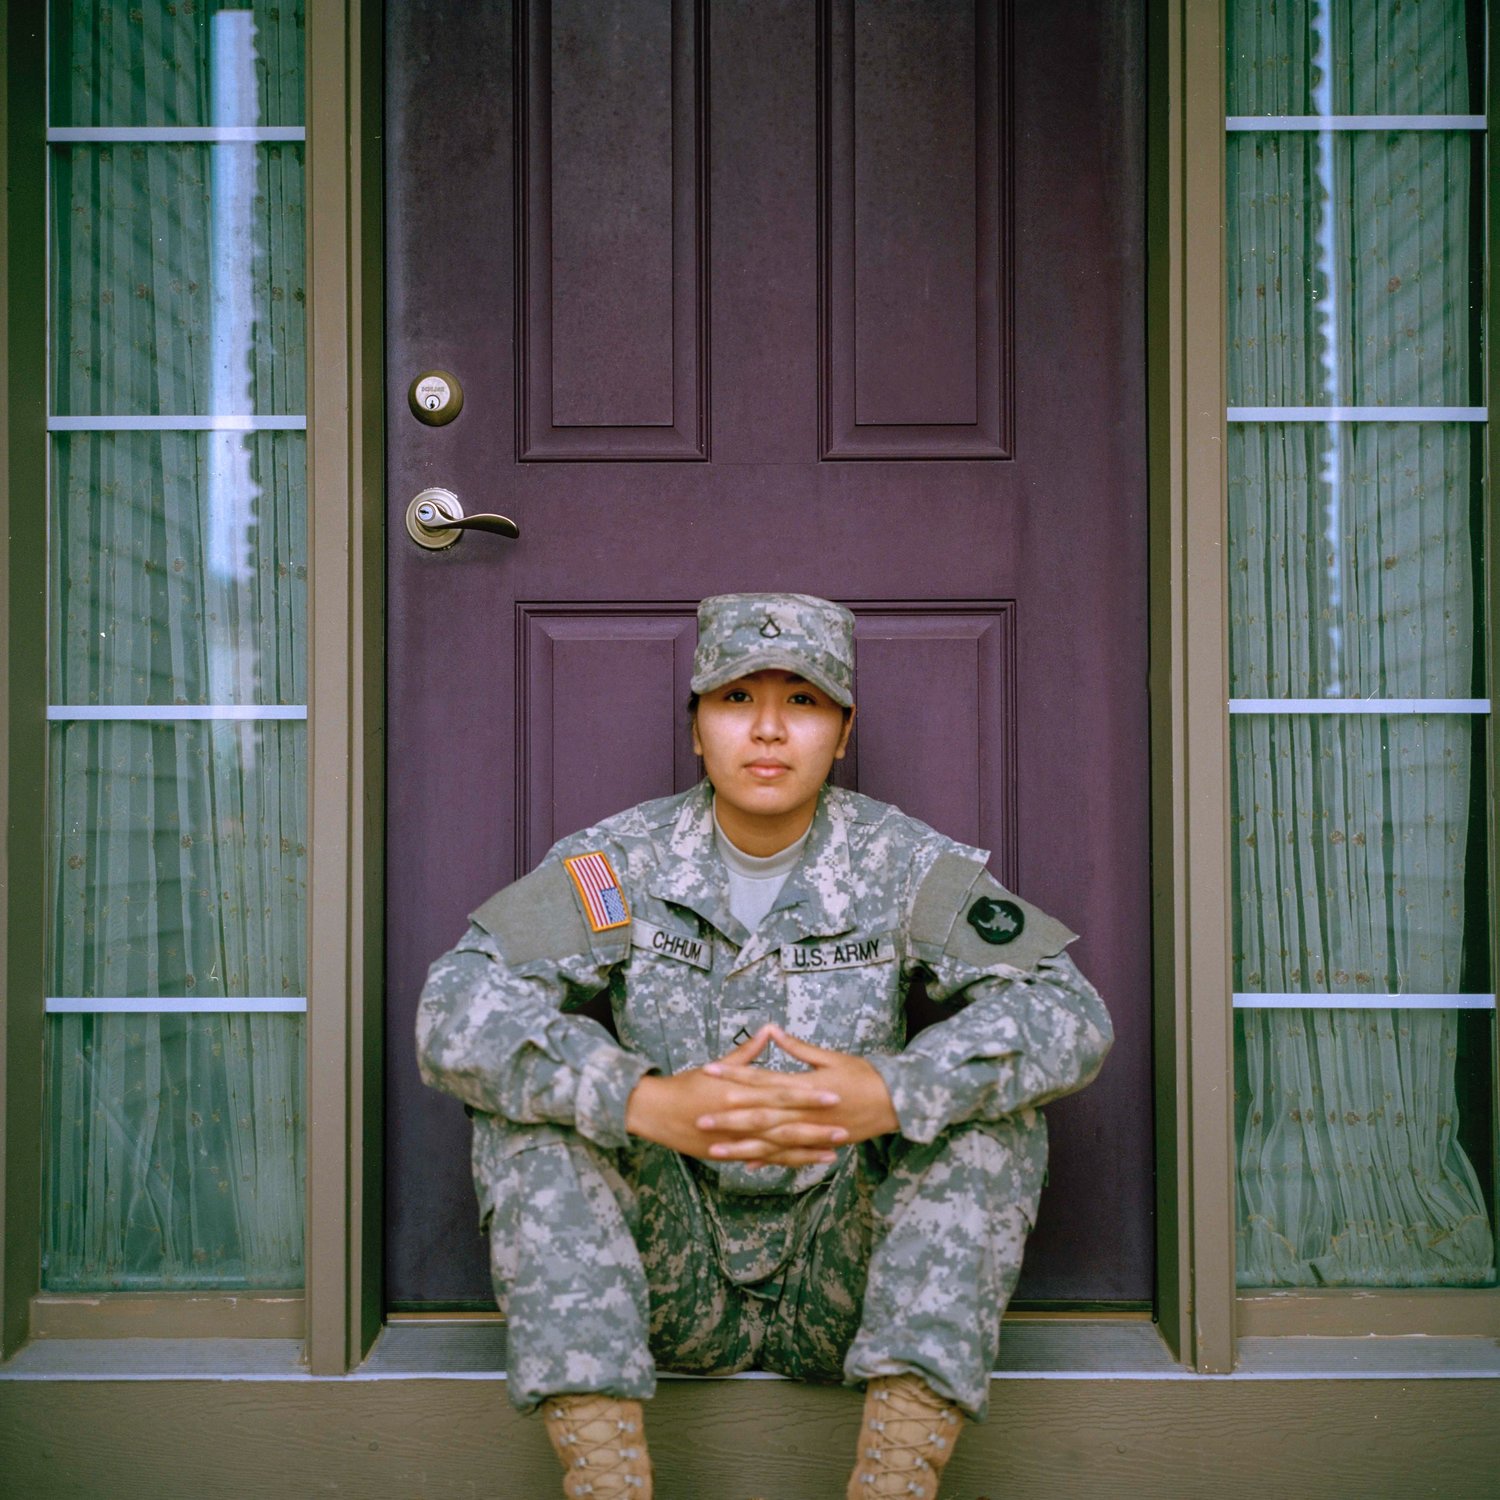 Allow service members reasonable time to reintegrate into the family after a separation. Give them space and encourage them to spend time with other fellow veterans who understand what they are going through...